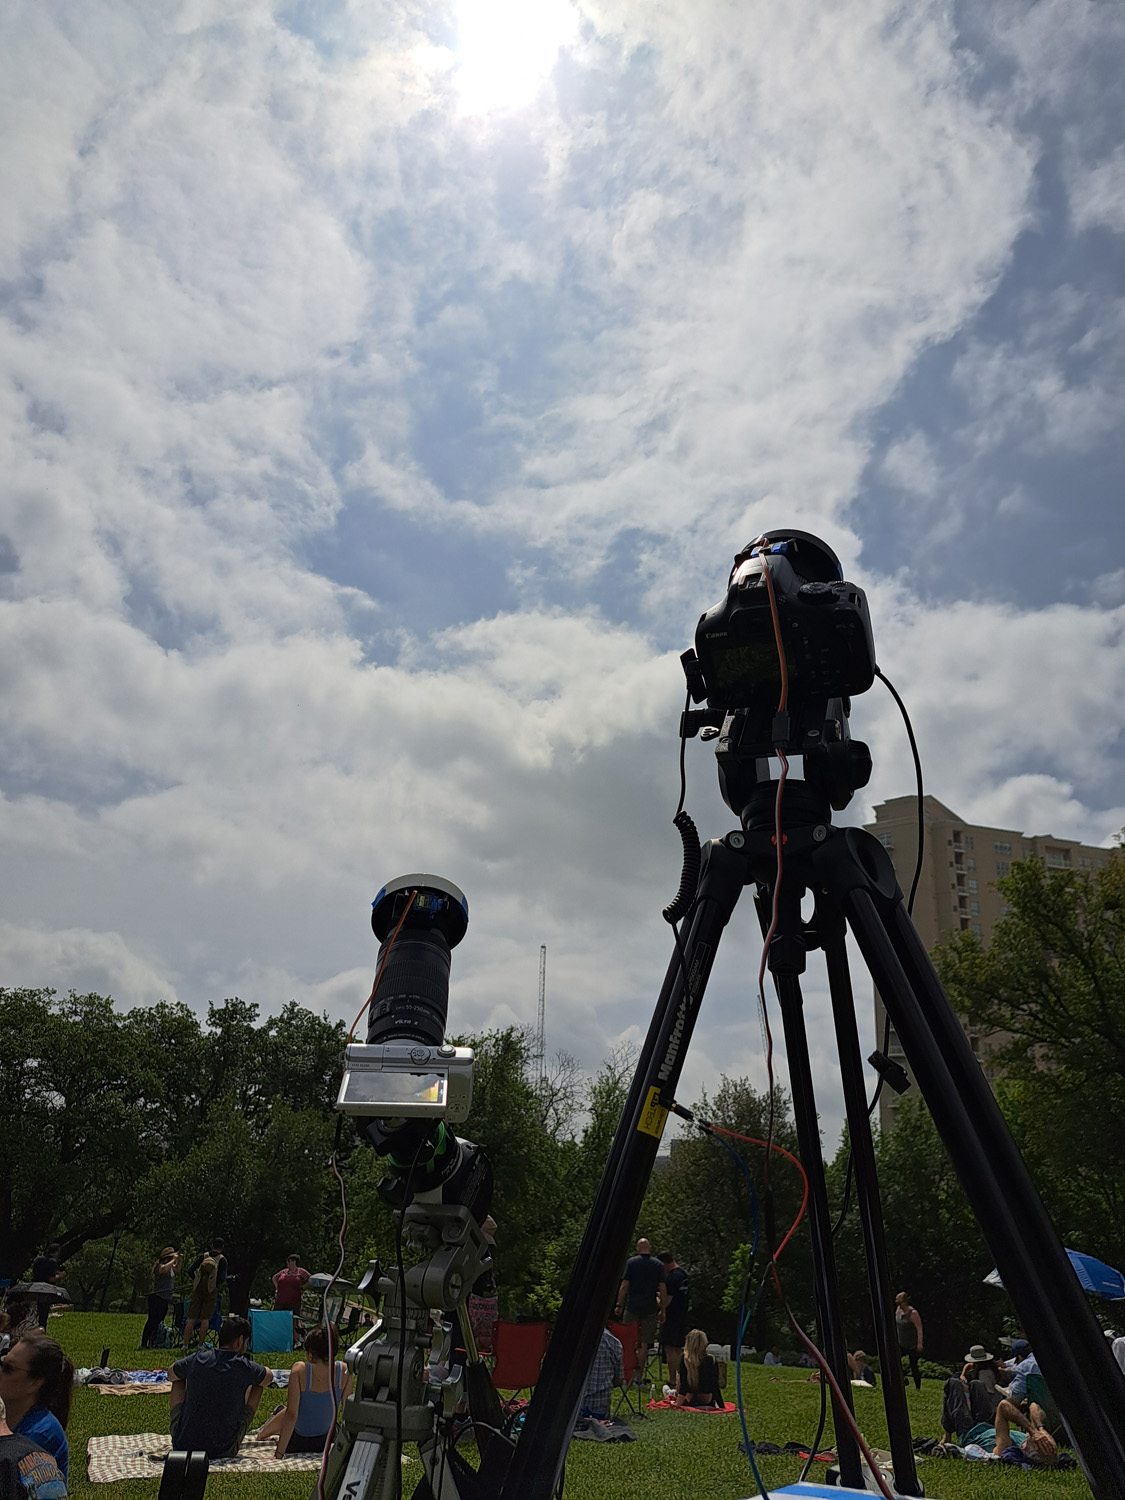 Two cameras pointed towards a mostly cloudy sky.